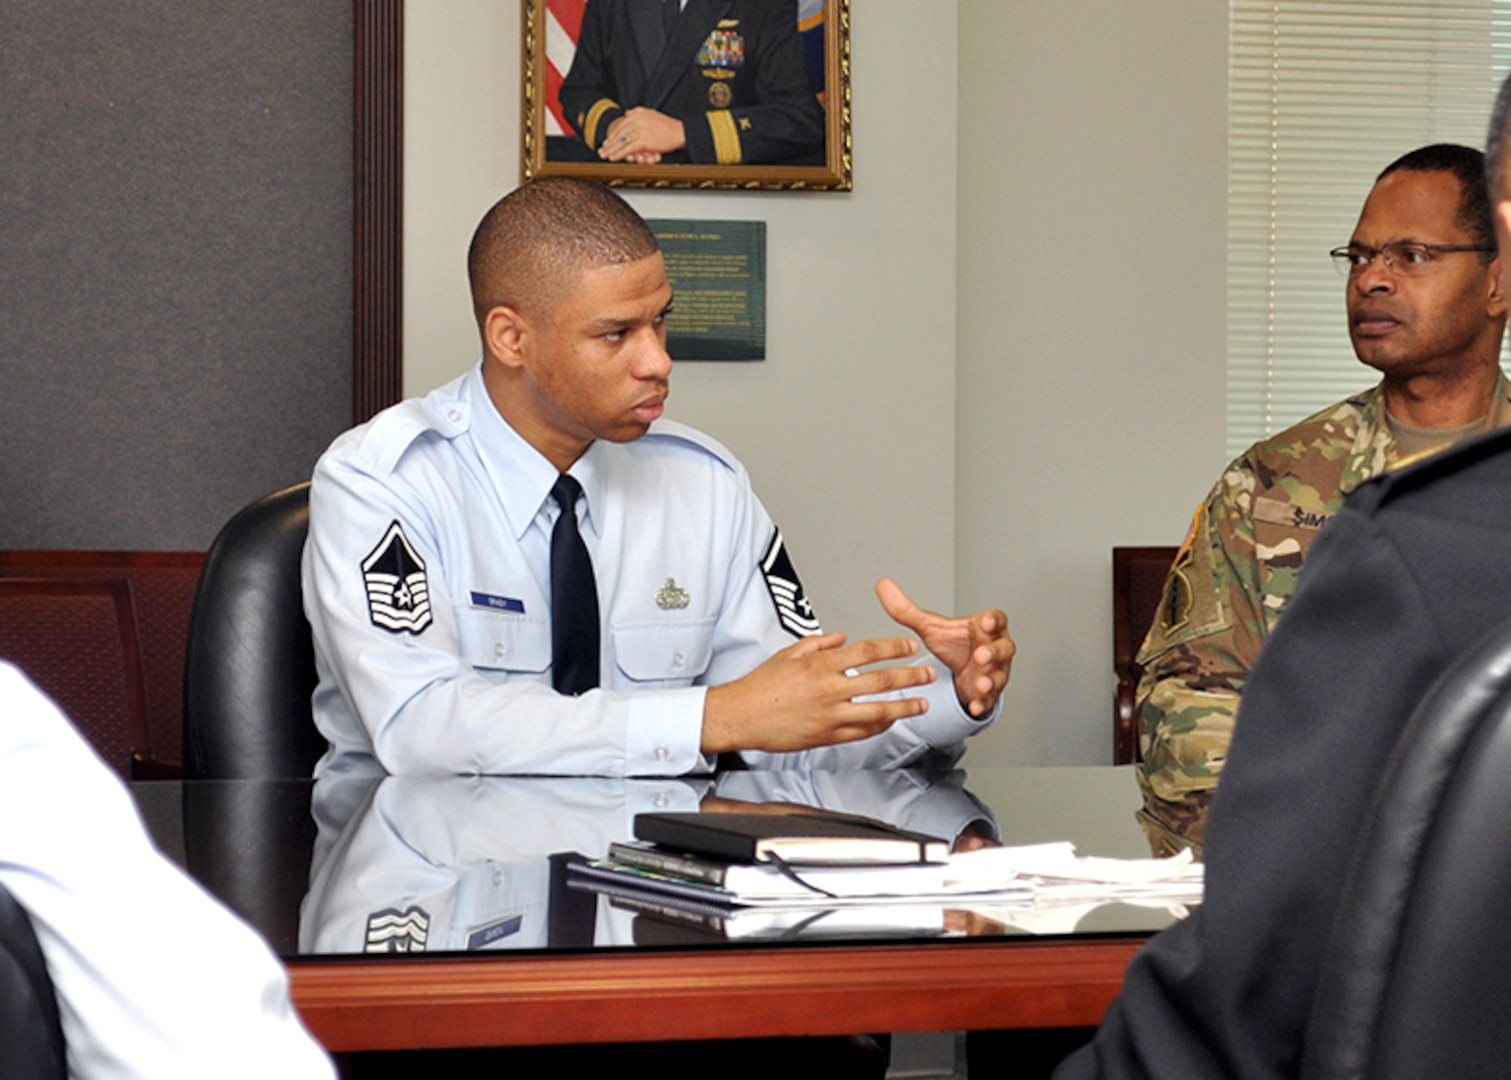 Air Force Master Sgt. Keith Grady, a noncommissioned officer assigned to DLA Energy through the Logistics Education Advancement Program, briefs Army Command Sgt. Maj. John Wayne Troxell, senior enlisted advisor to the Chairman of the Joint Chiefs of Staff, during a meeting at the McNamara Headquarters Complex in Fort Belvoir, Virginia, March 8.